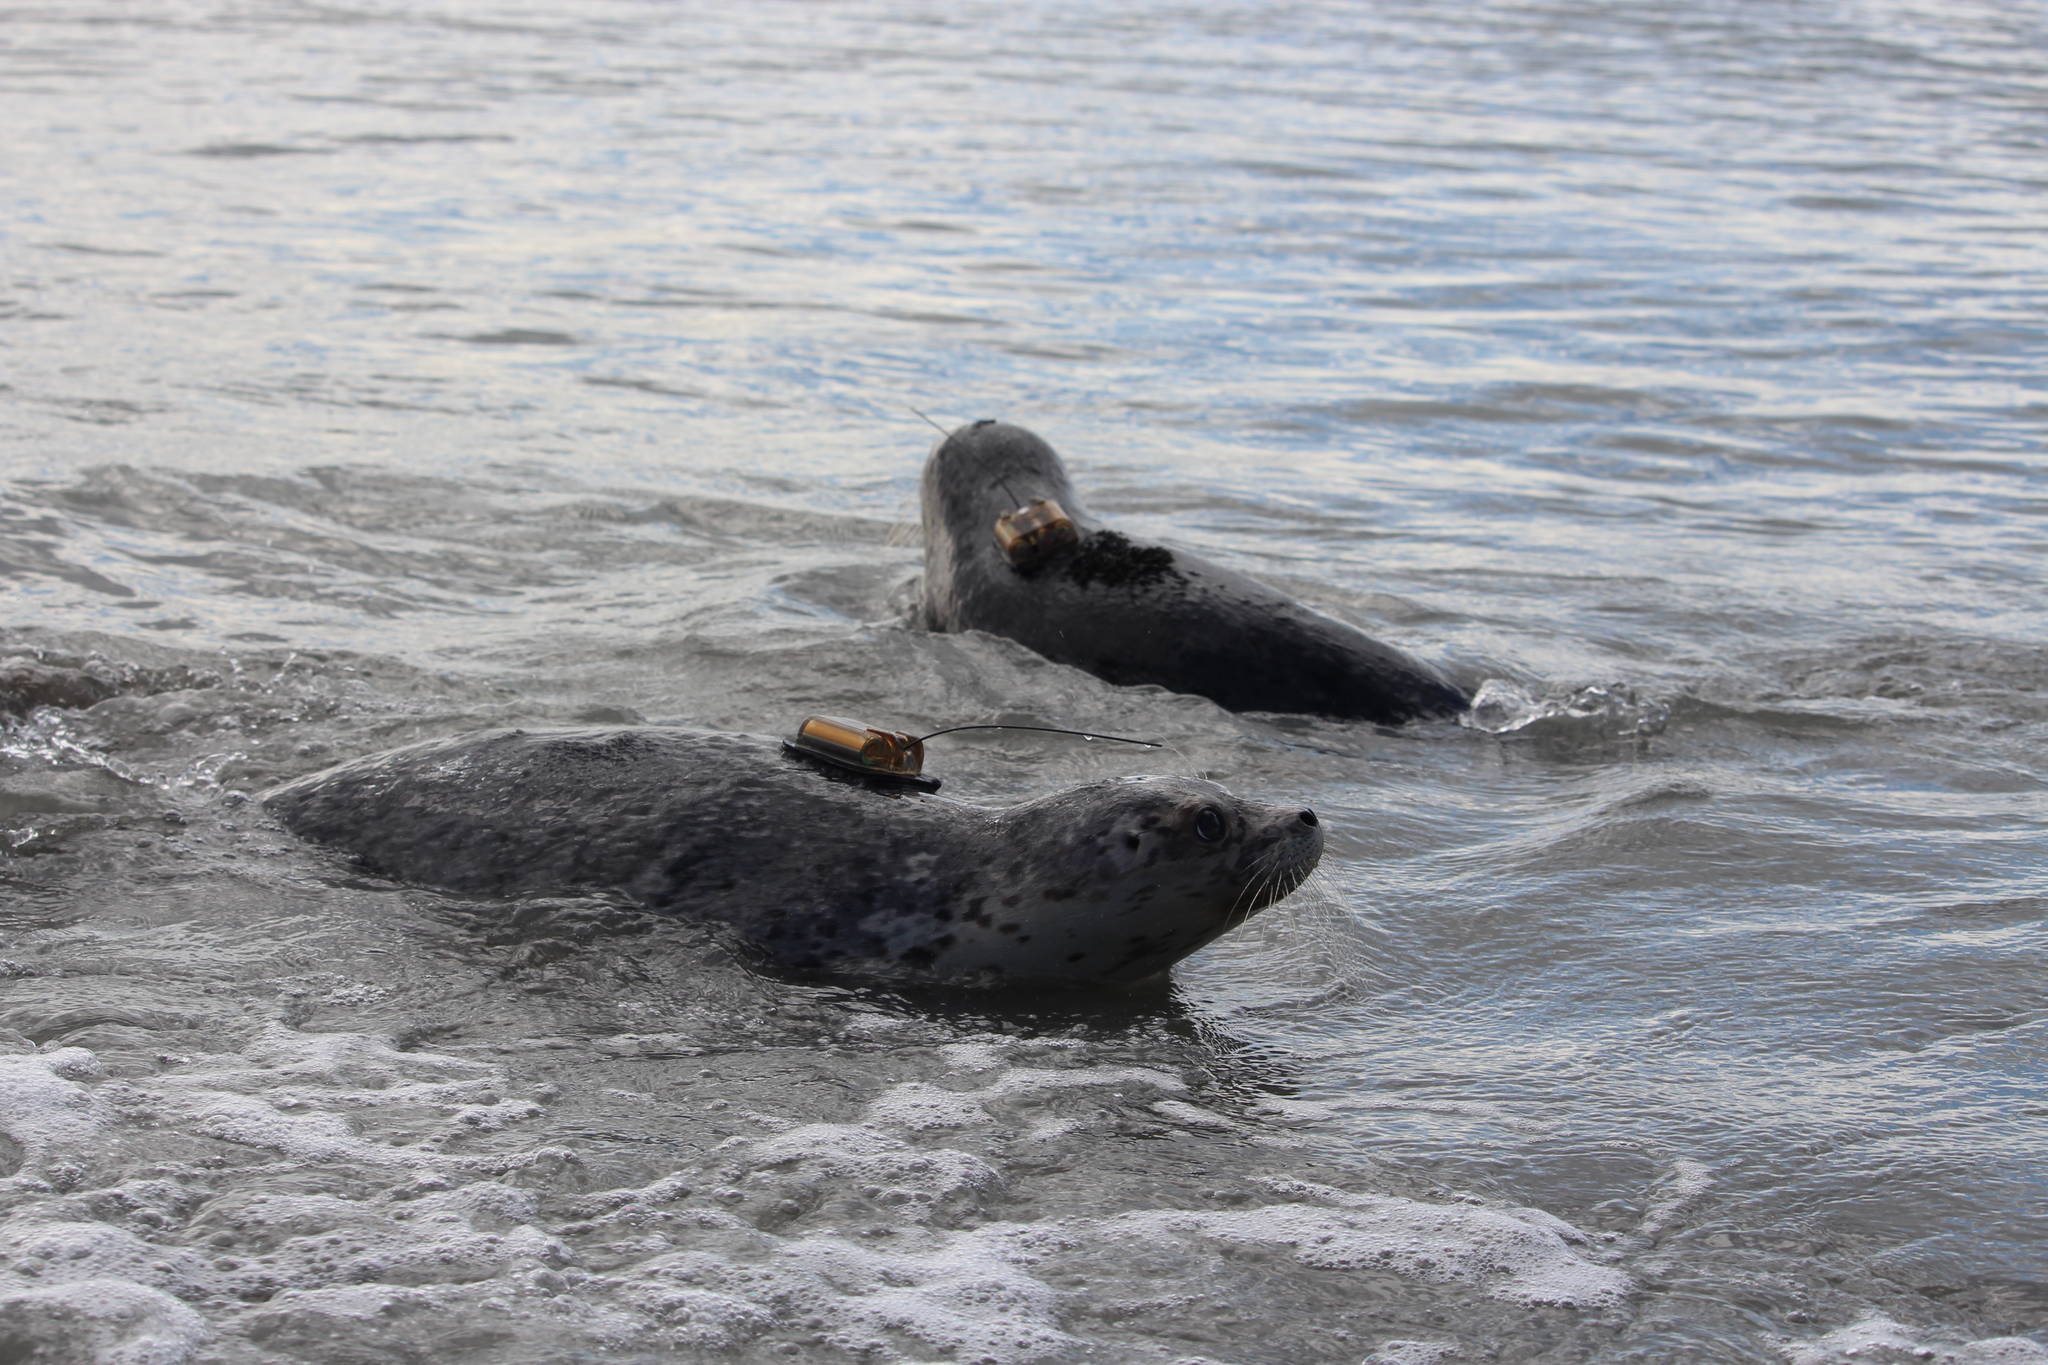 Harbor seals enjoy the waters of Cook Inlet after being released by staff from the Alaska SeaLife Center at the Kenai Beach on Aug. 27, 2020. (Photo by Brian Mazurek/Peninsula Clarion)